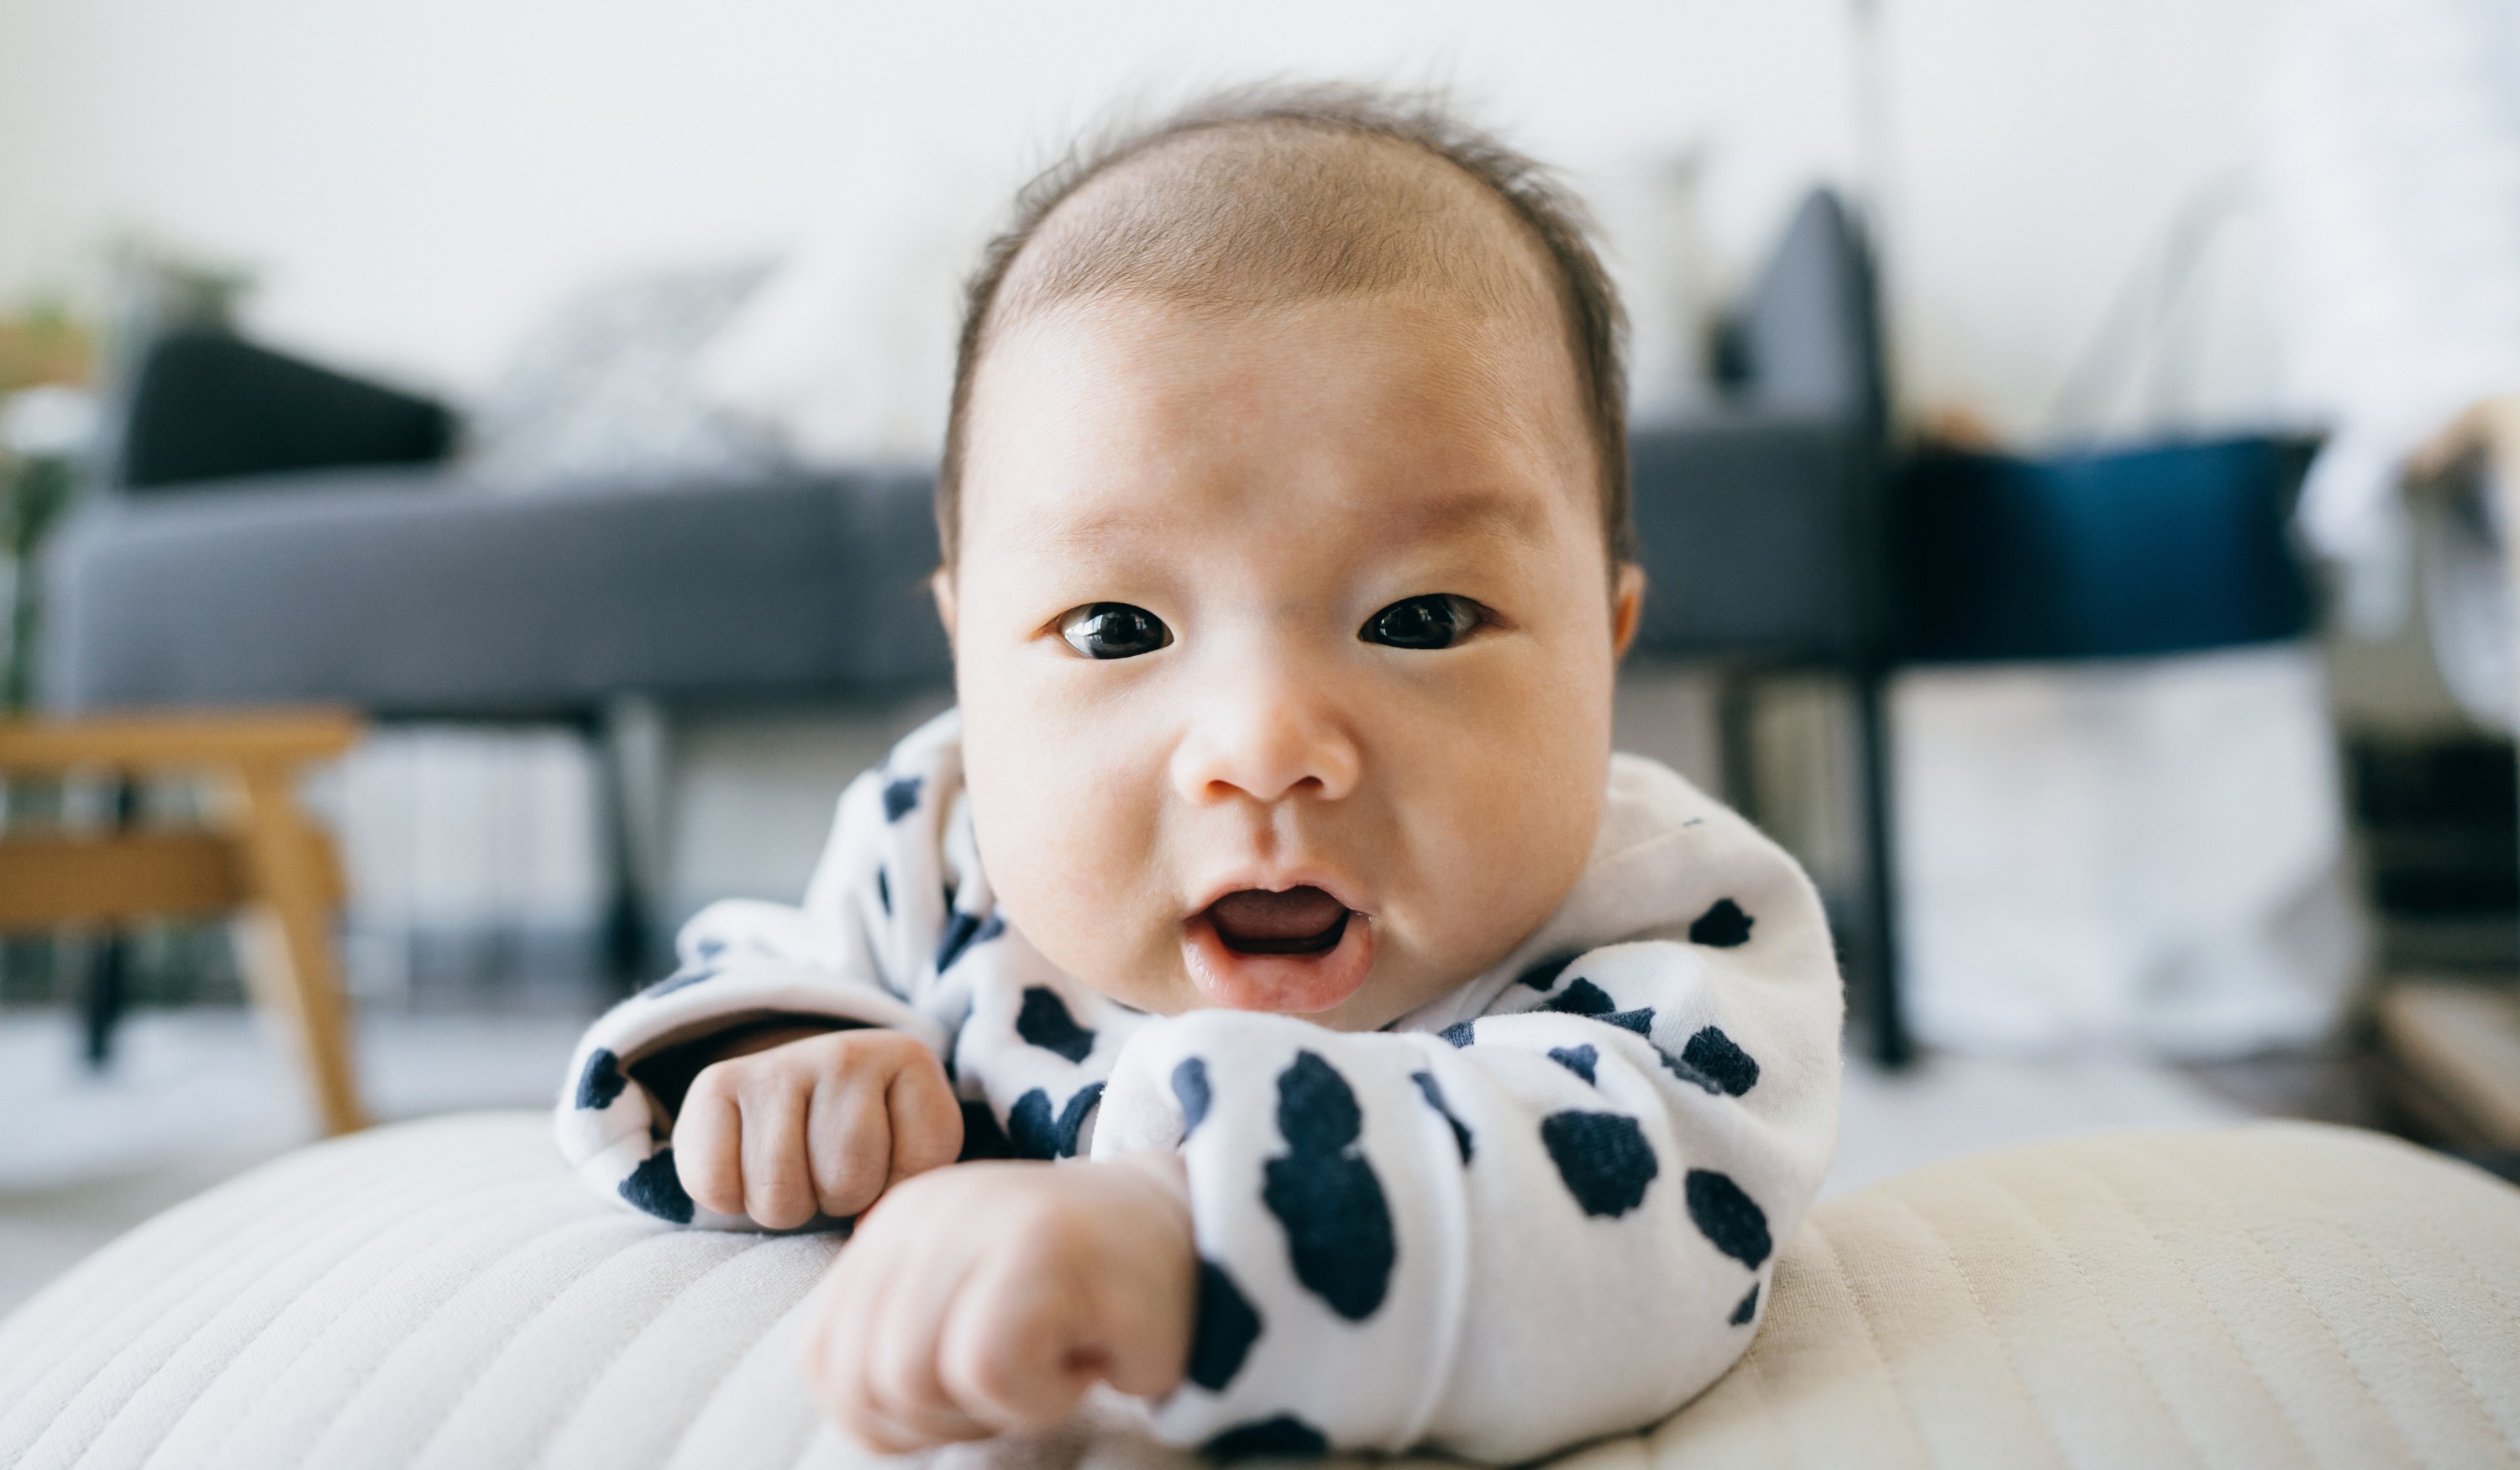 Tummy time activities: How to make it fun